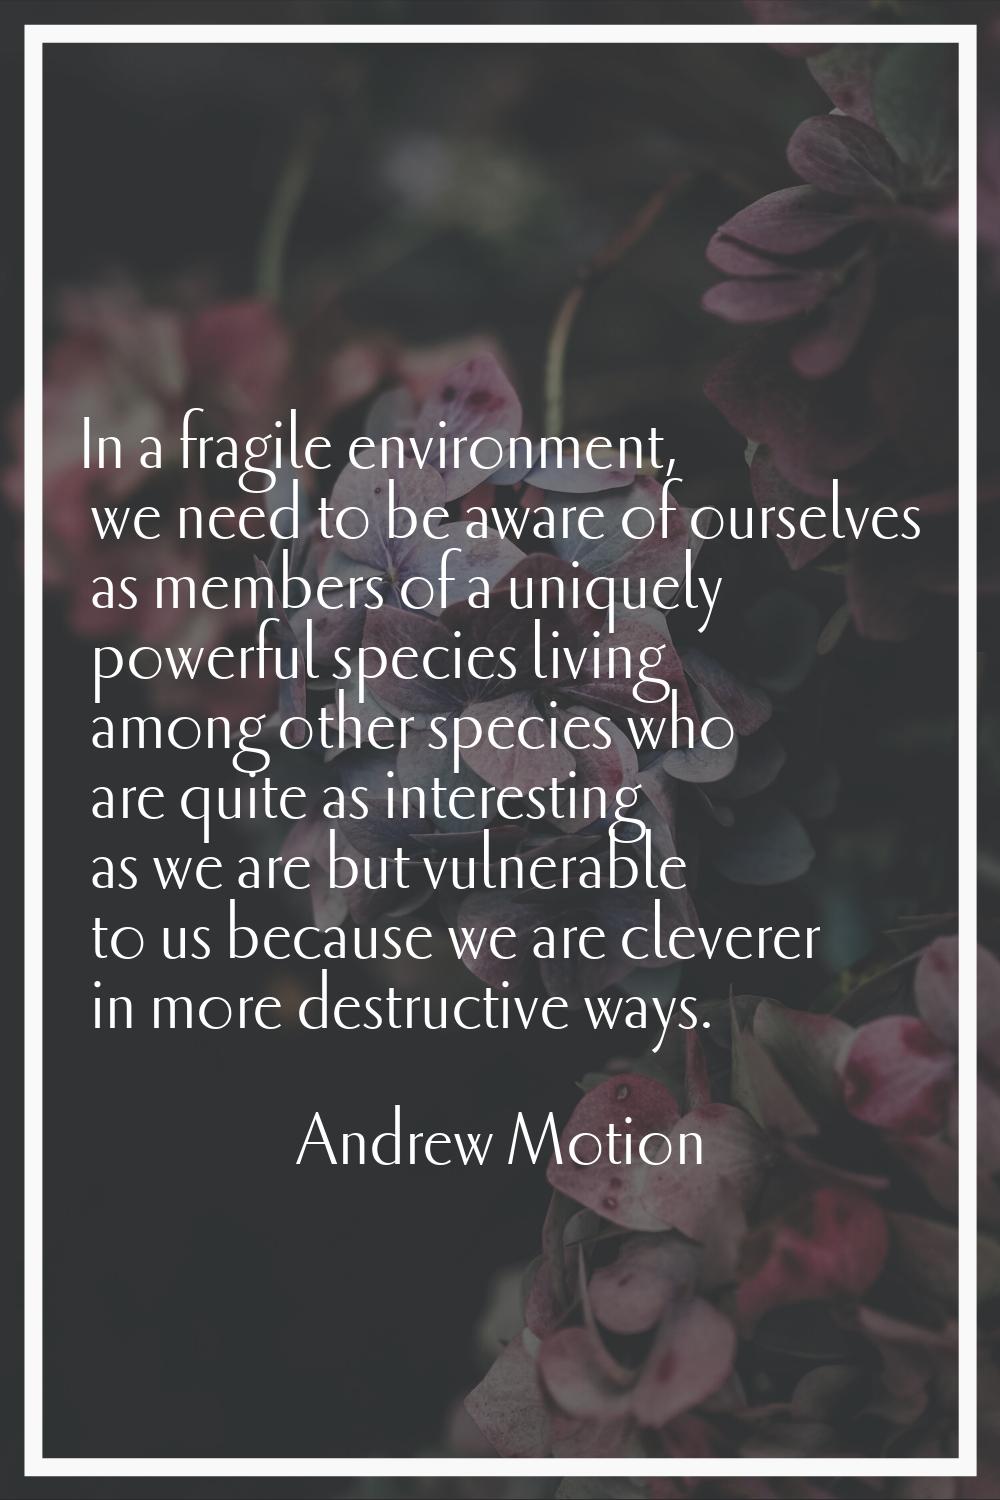 In a fragile environment, we need to be aware of ourselves as members of a uniquely powerful specie